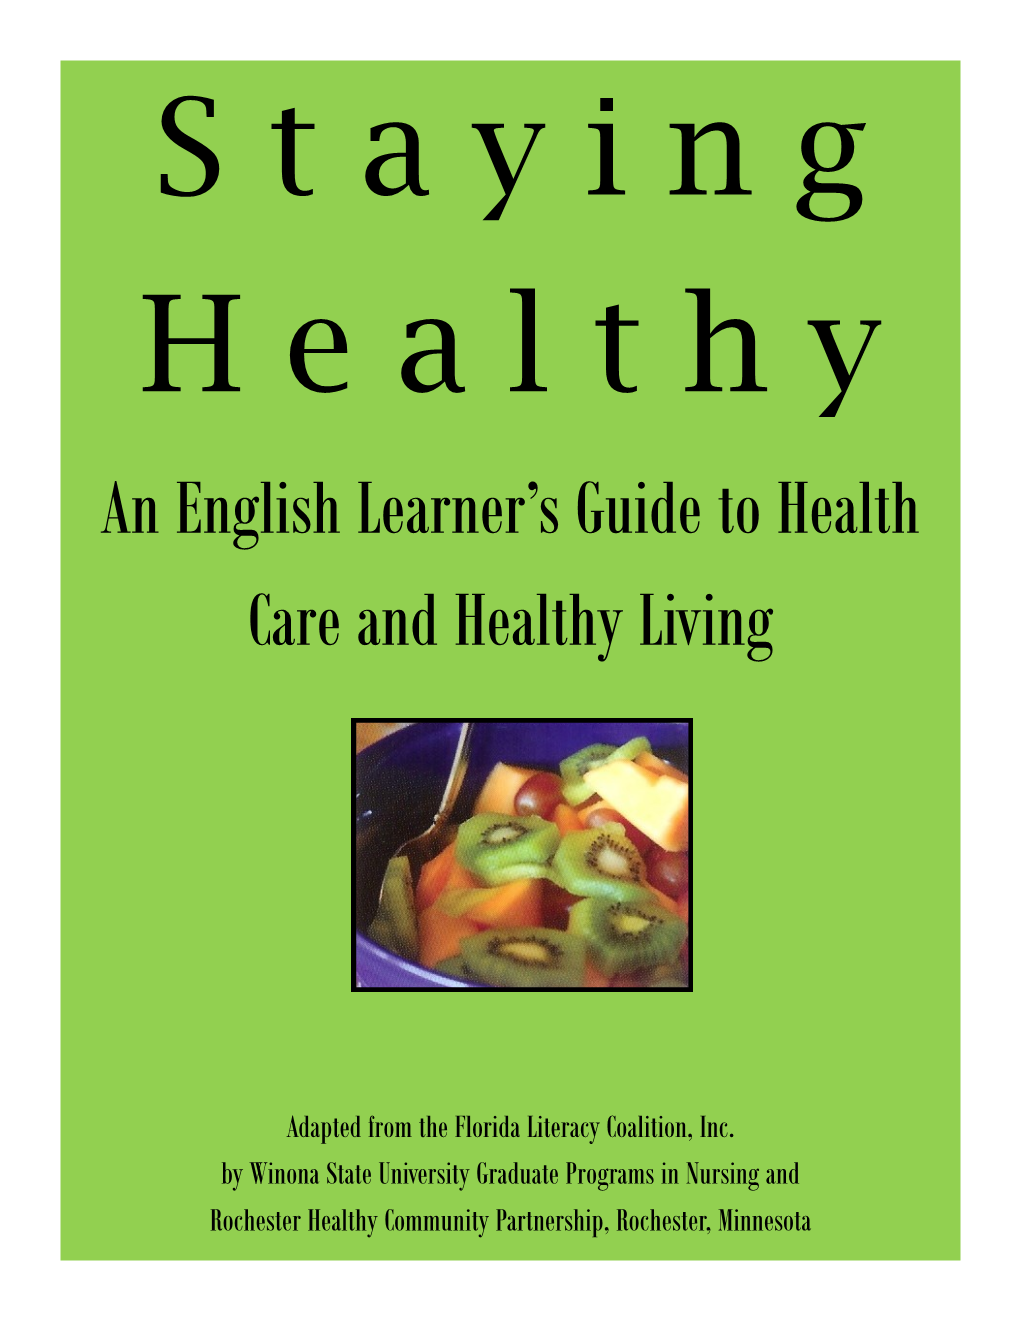 An English Learner's Guide to Health Care and Healthy Living